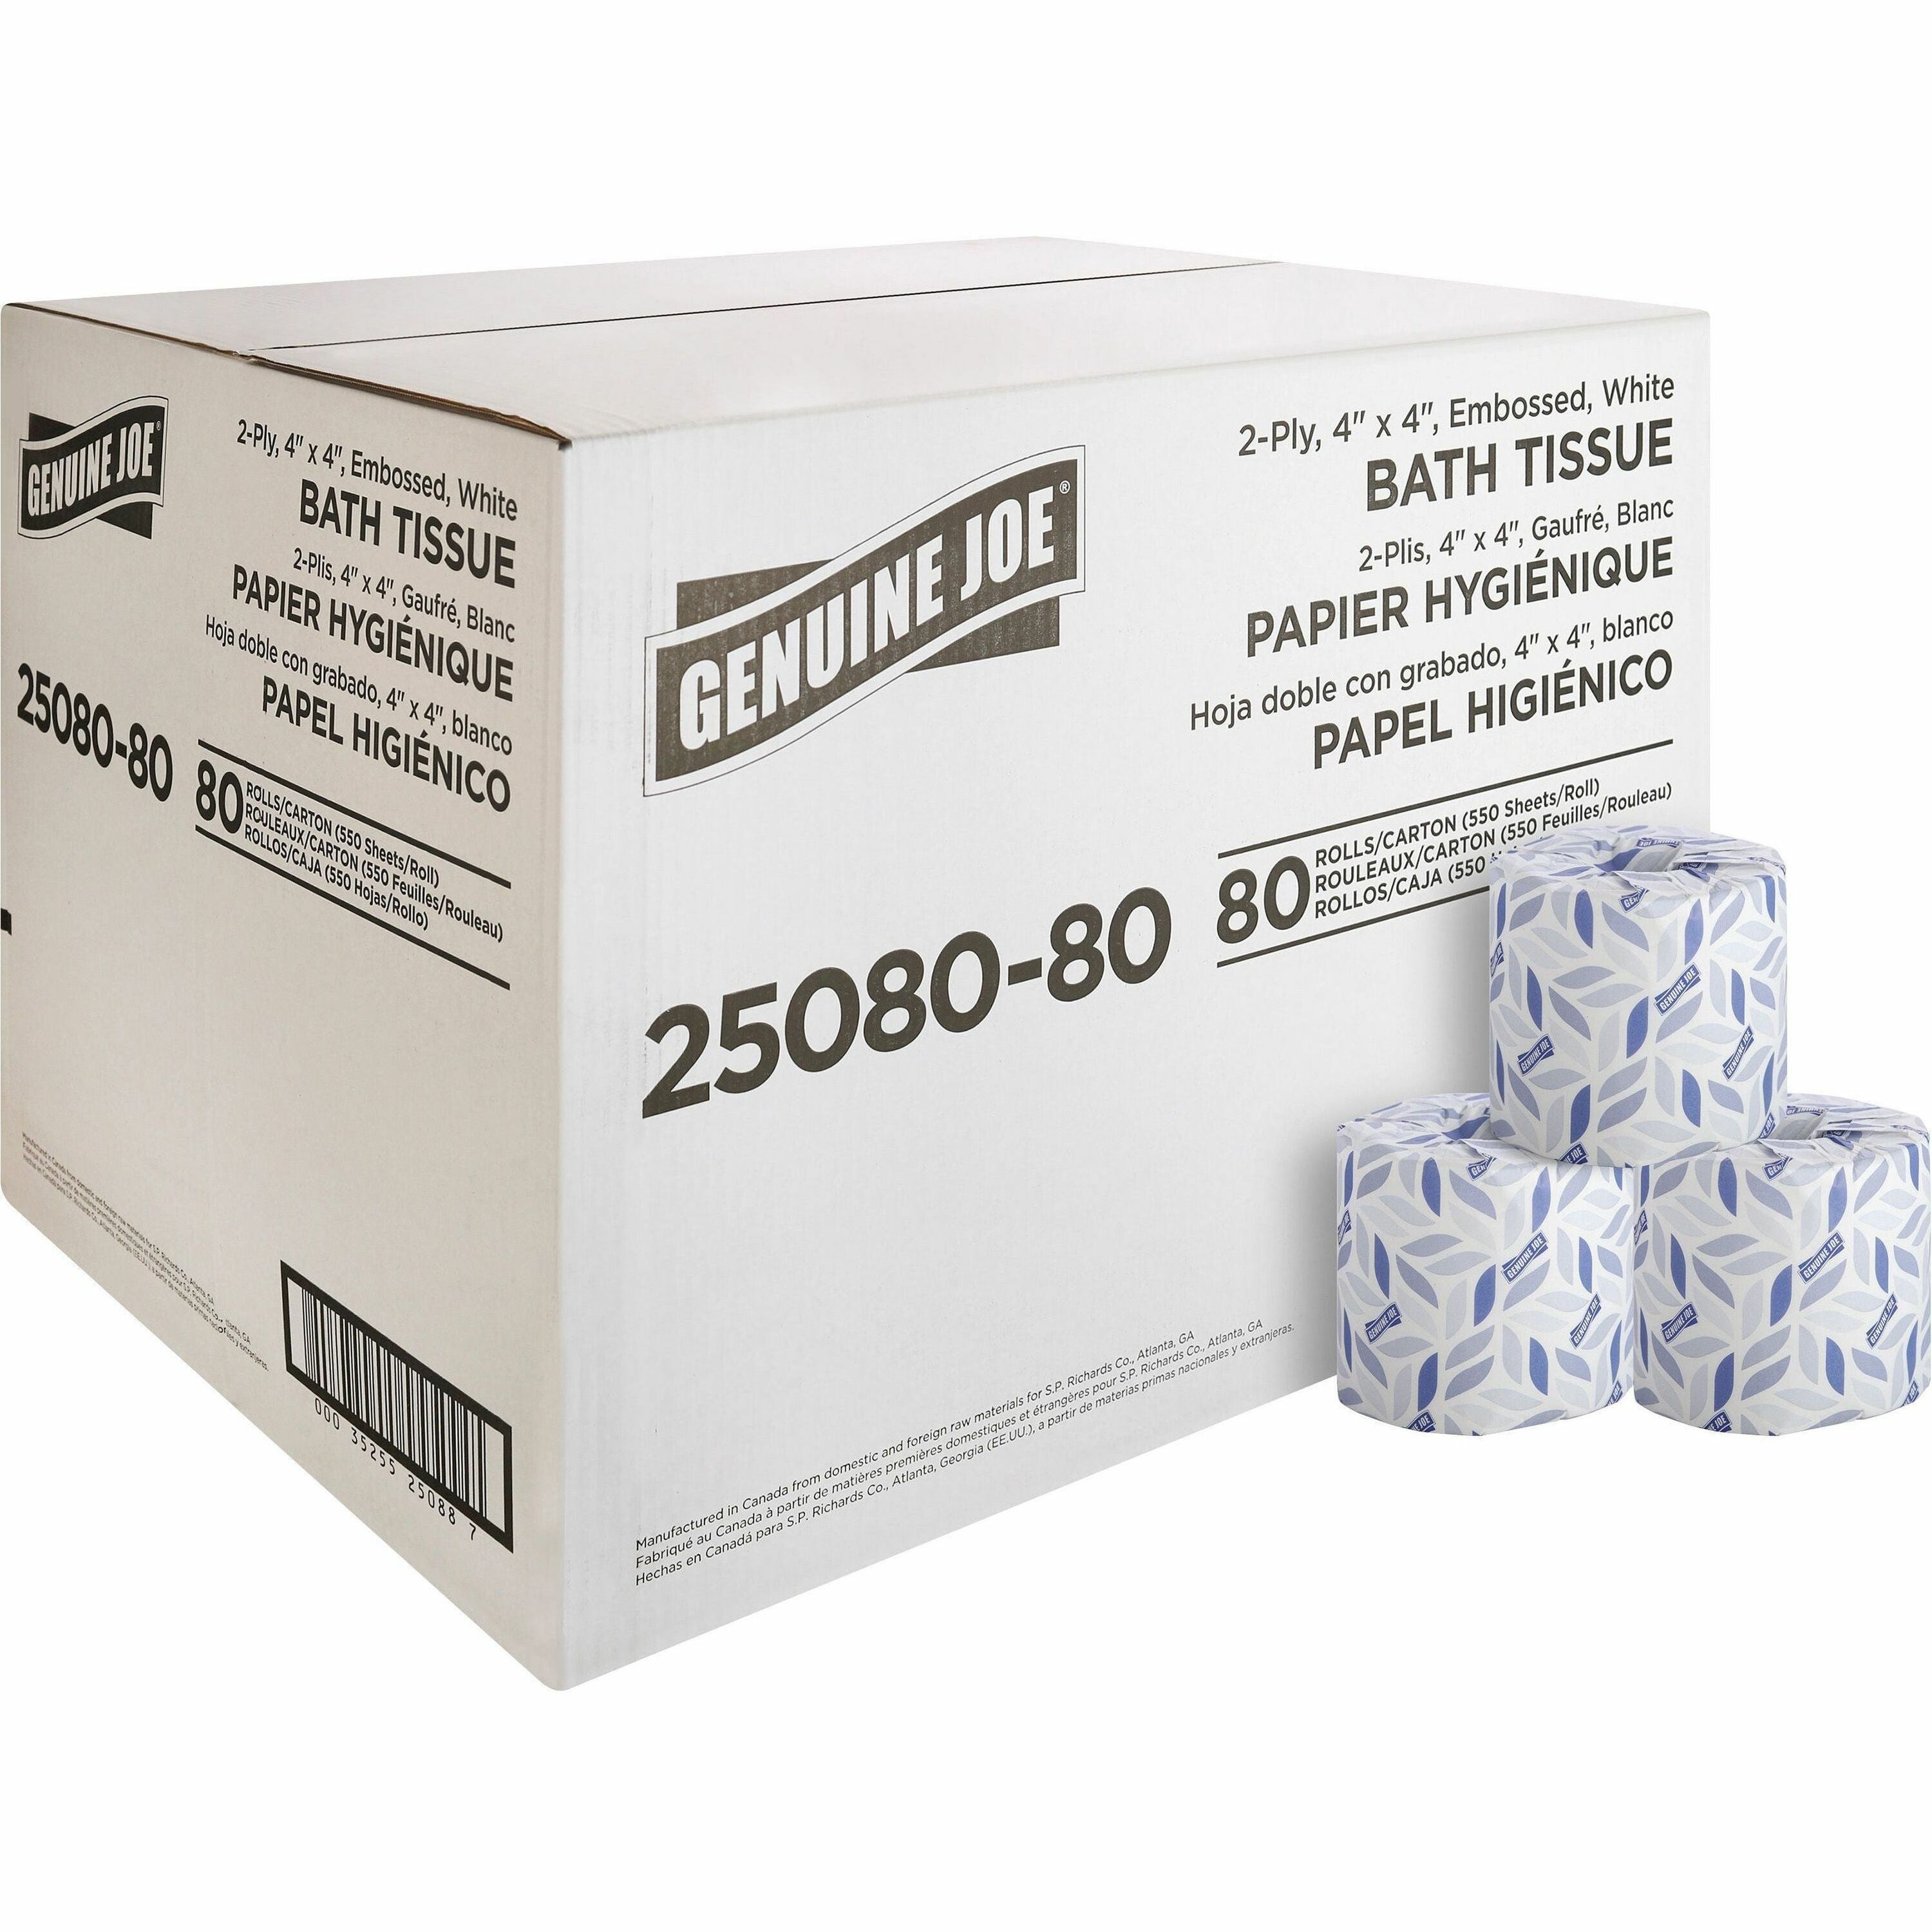 genuine-joe-embossed-roll-bath-tissue-2-ply-4-x-4-550-sheets-roll-163-core-white-soft-absorbent-perforated-for-restroom-80-carton_gjo2508080 - 1